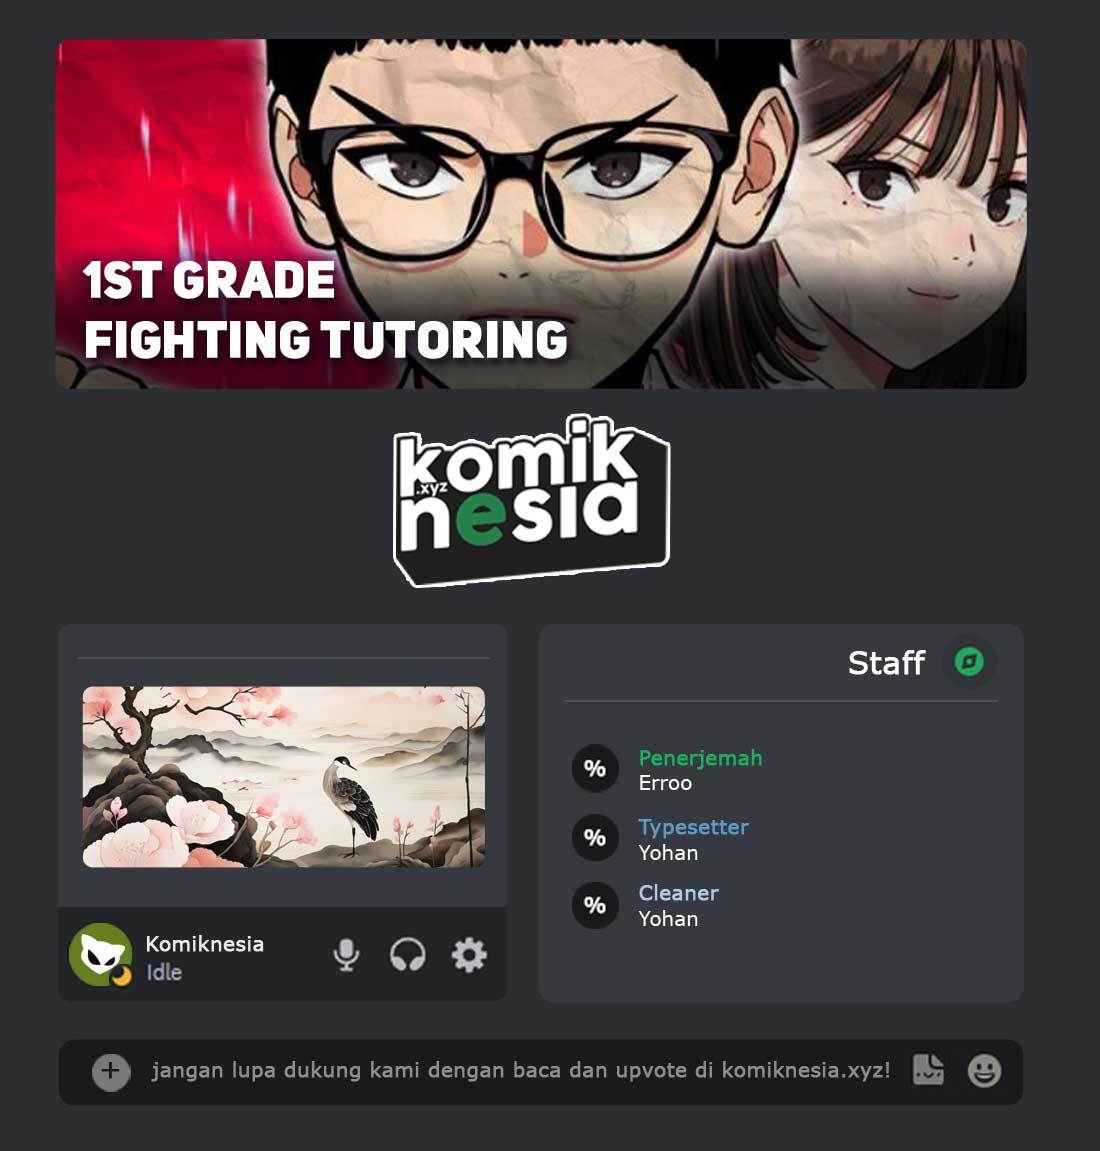 Top 1 Fighting Tutoring Chapter 9